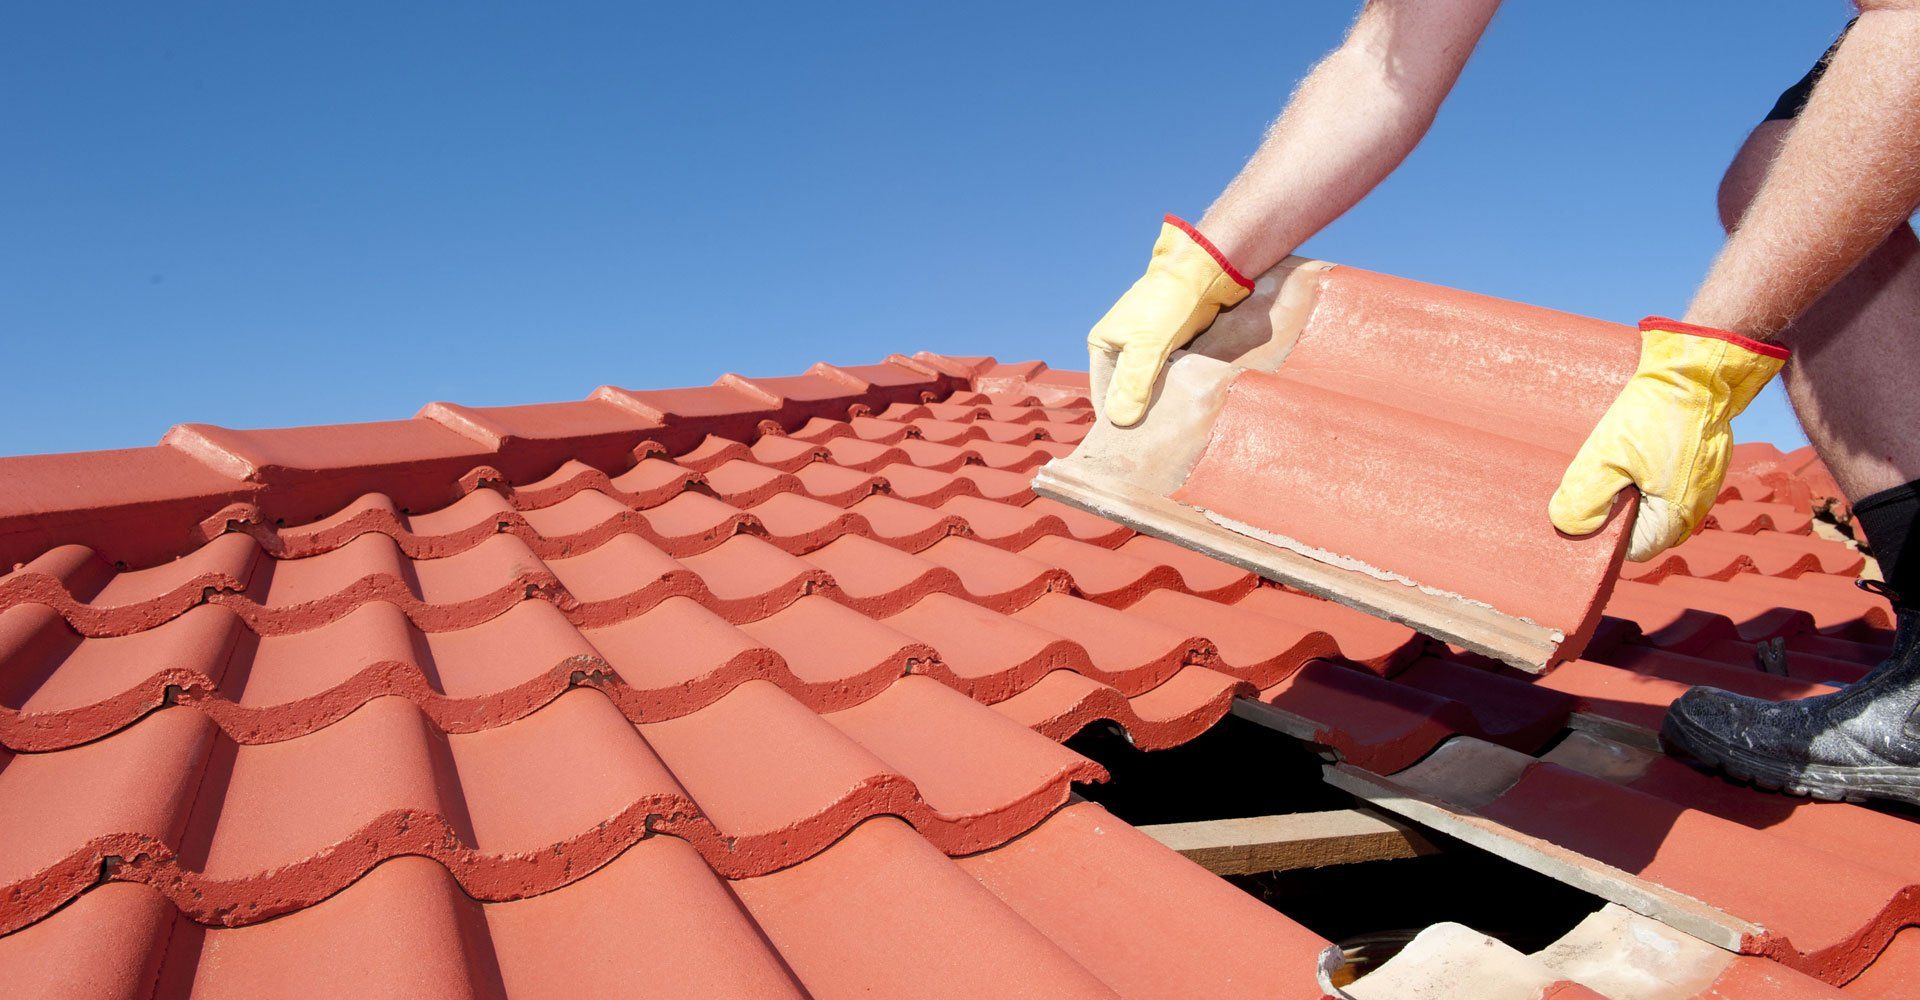 Roof repair, worker with yellow gloves replacing red tiles